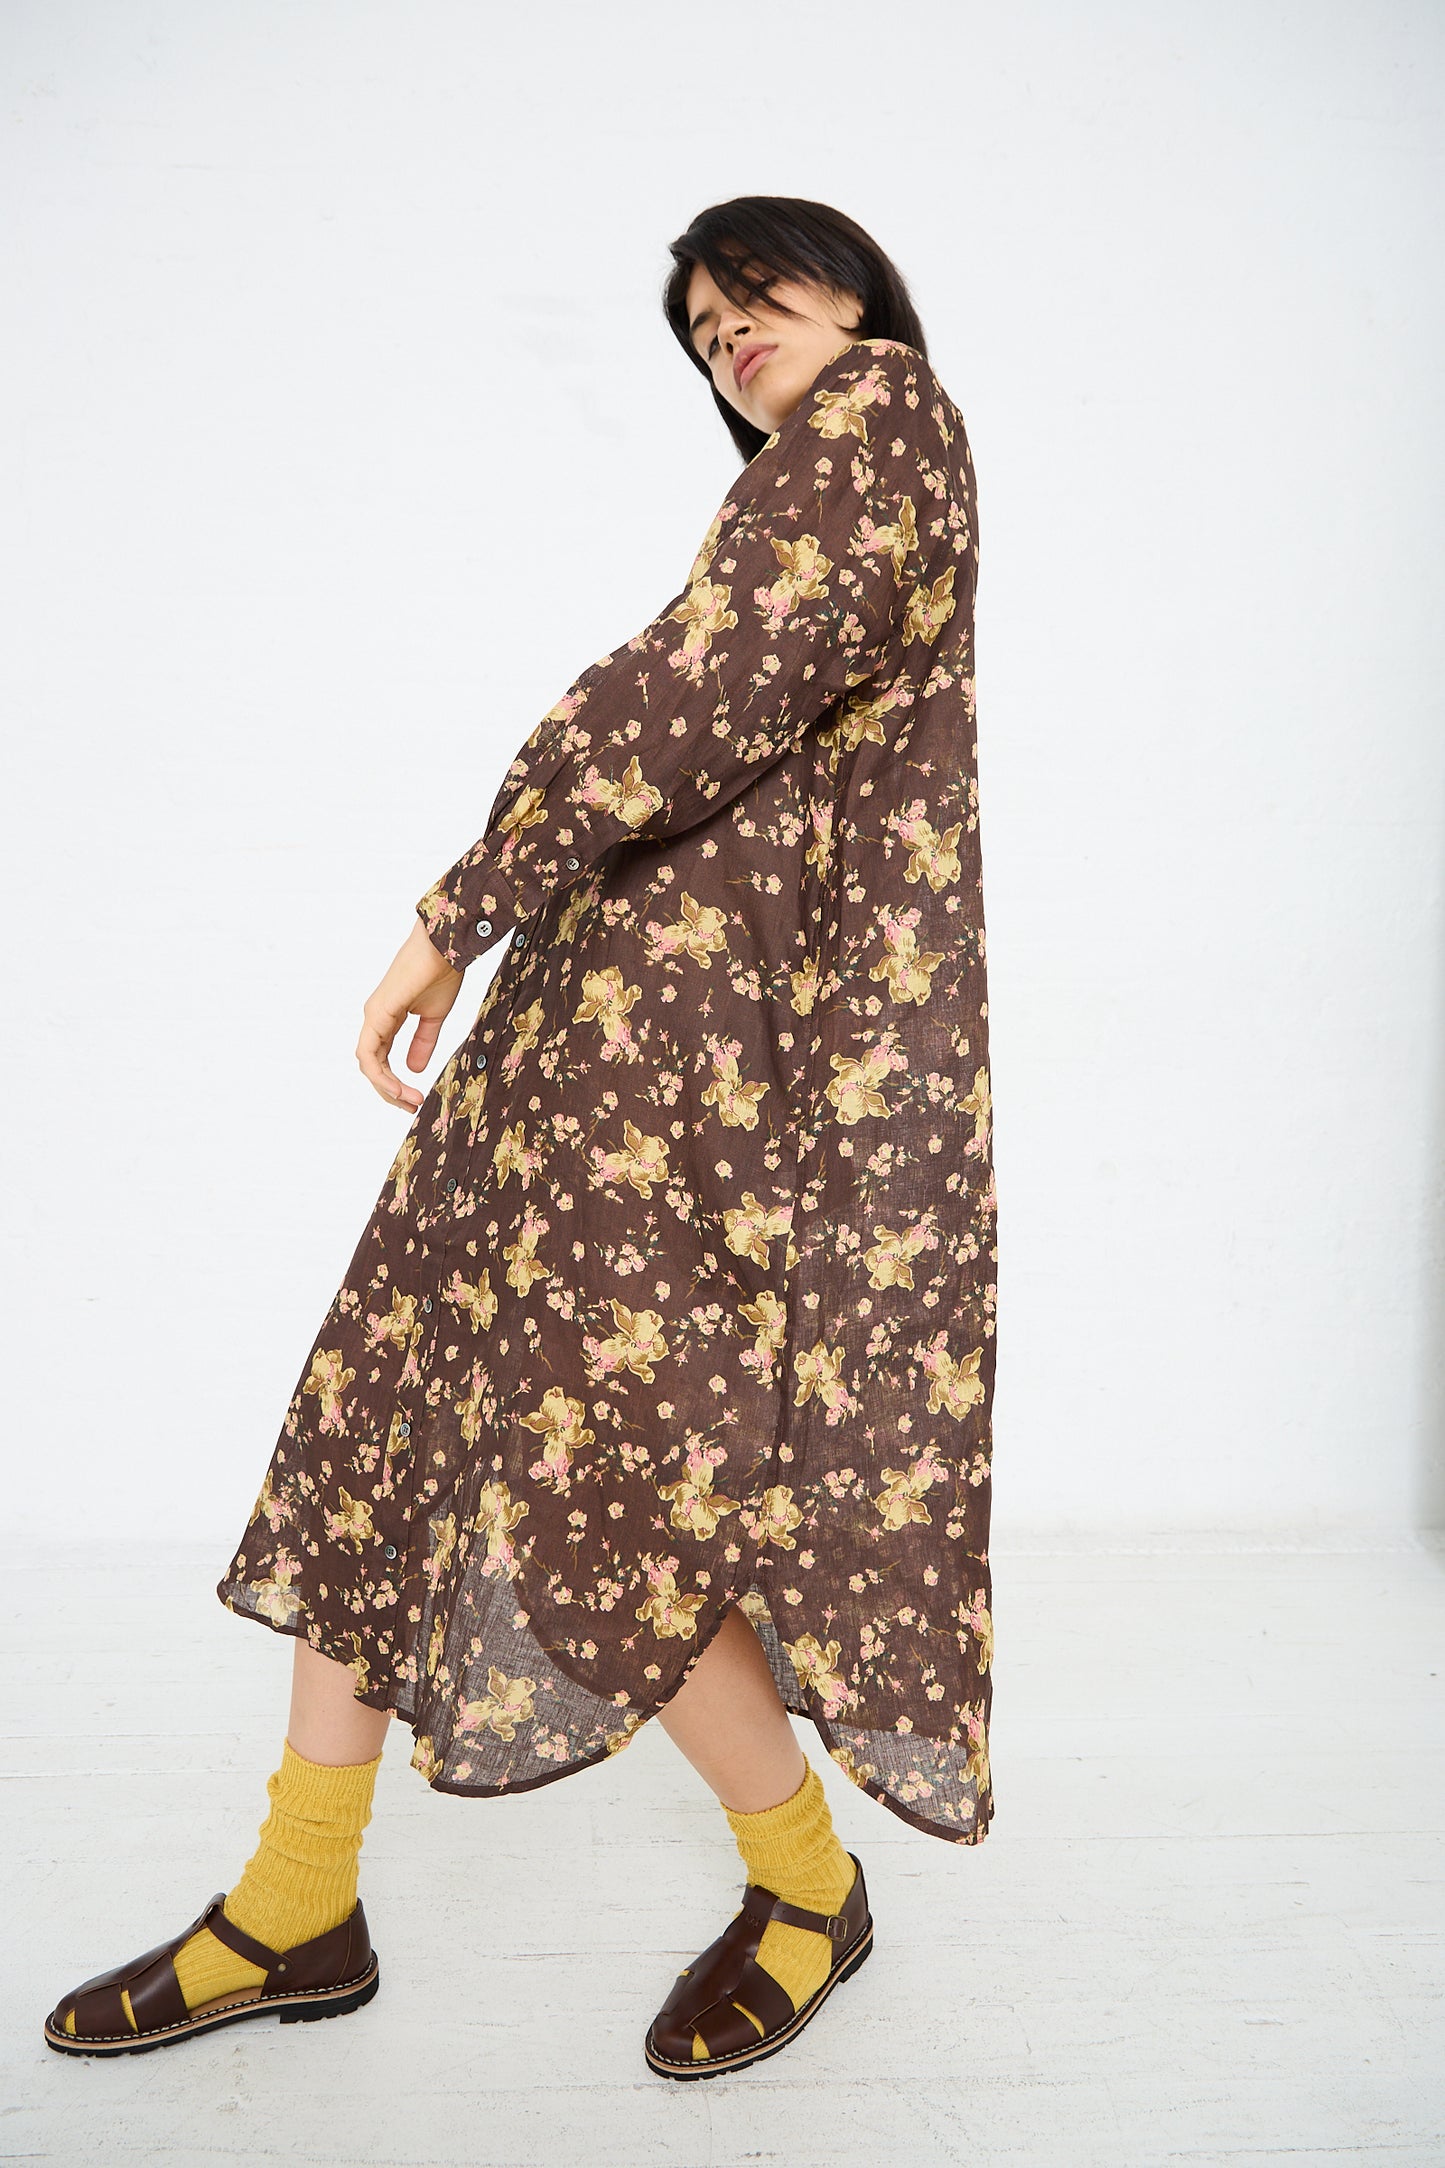 Person wearing the Linen Flower Print Dress in Brown by Ichi Antiquités, yellow socks, and brown sandals, posing against a plain white background.